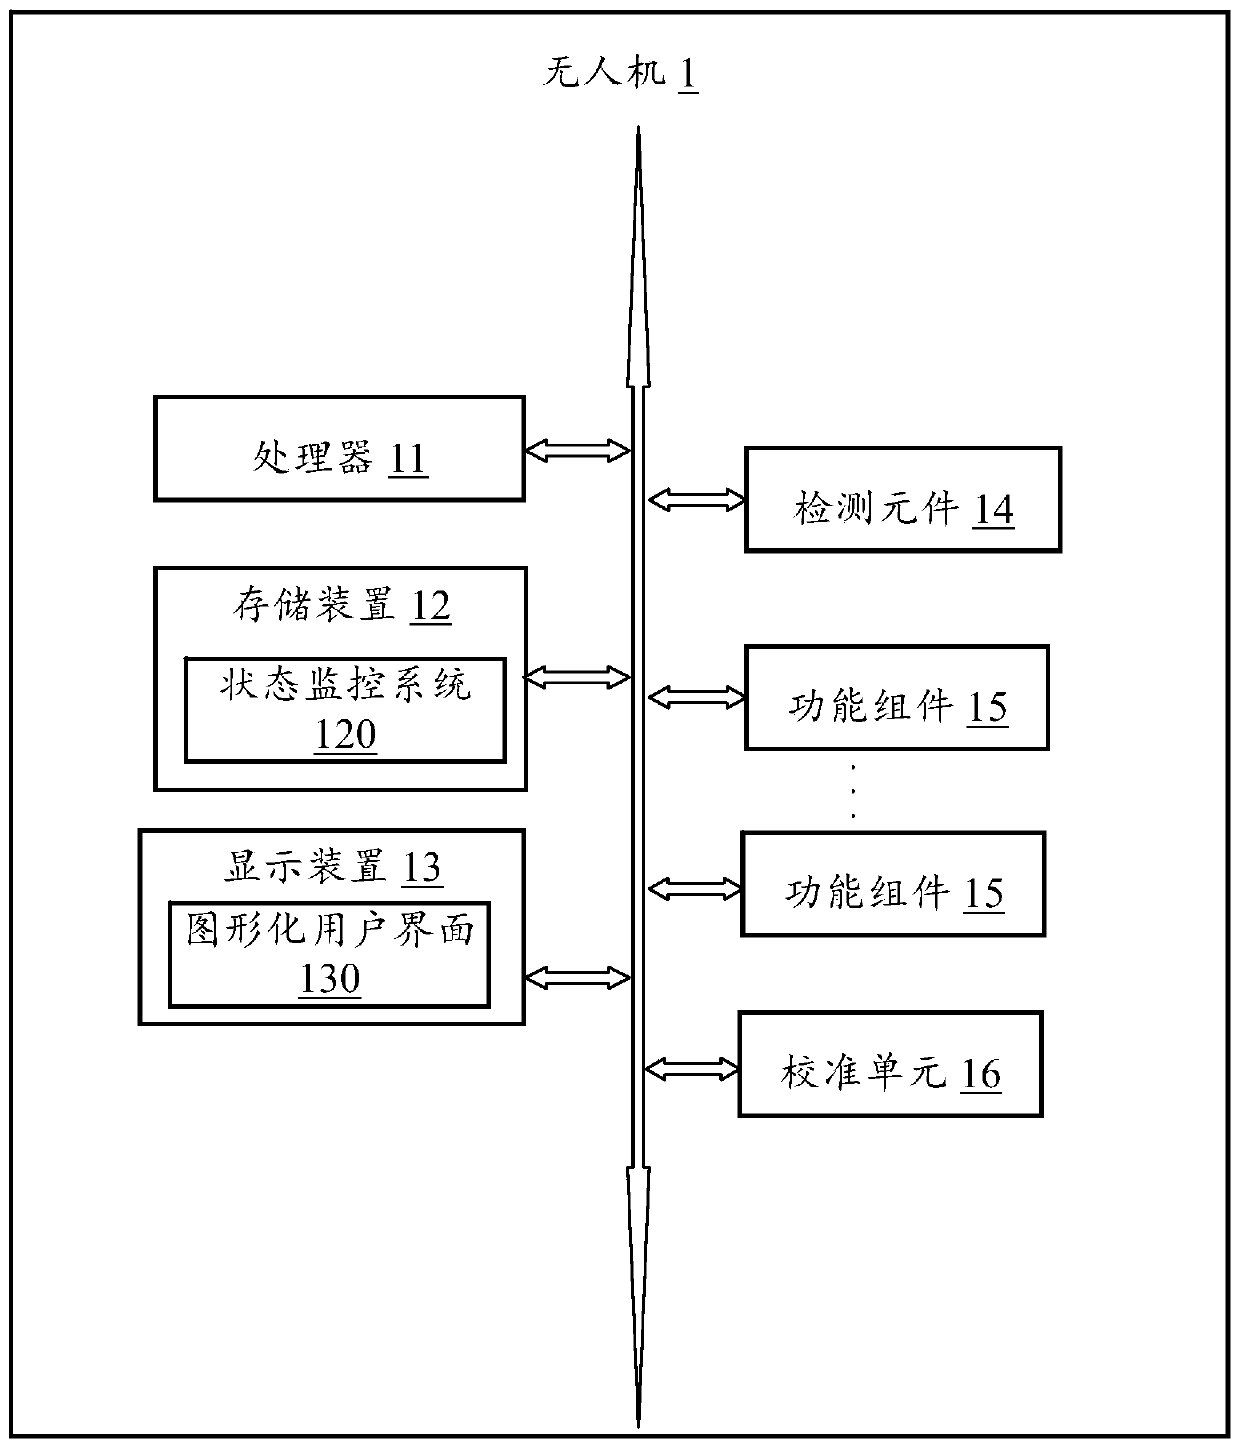 Unmanned aerial vehicle and its state monitoring method, state monitoring system, state monitoring device